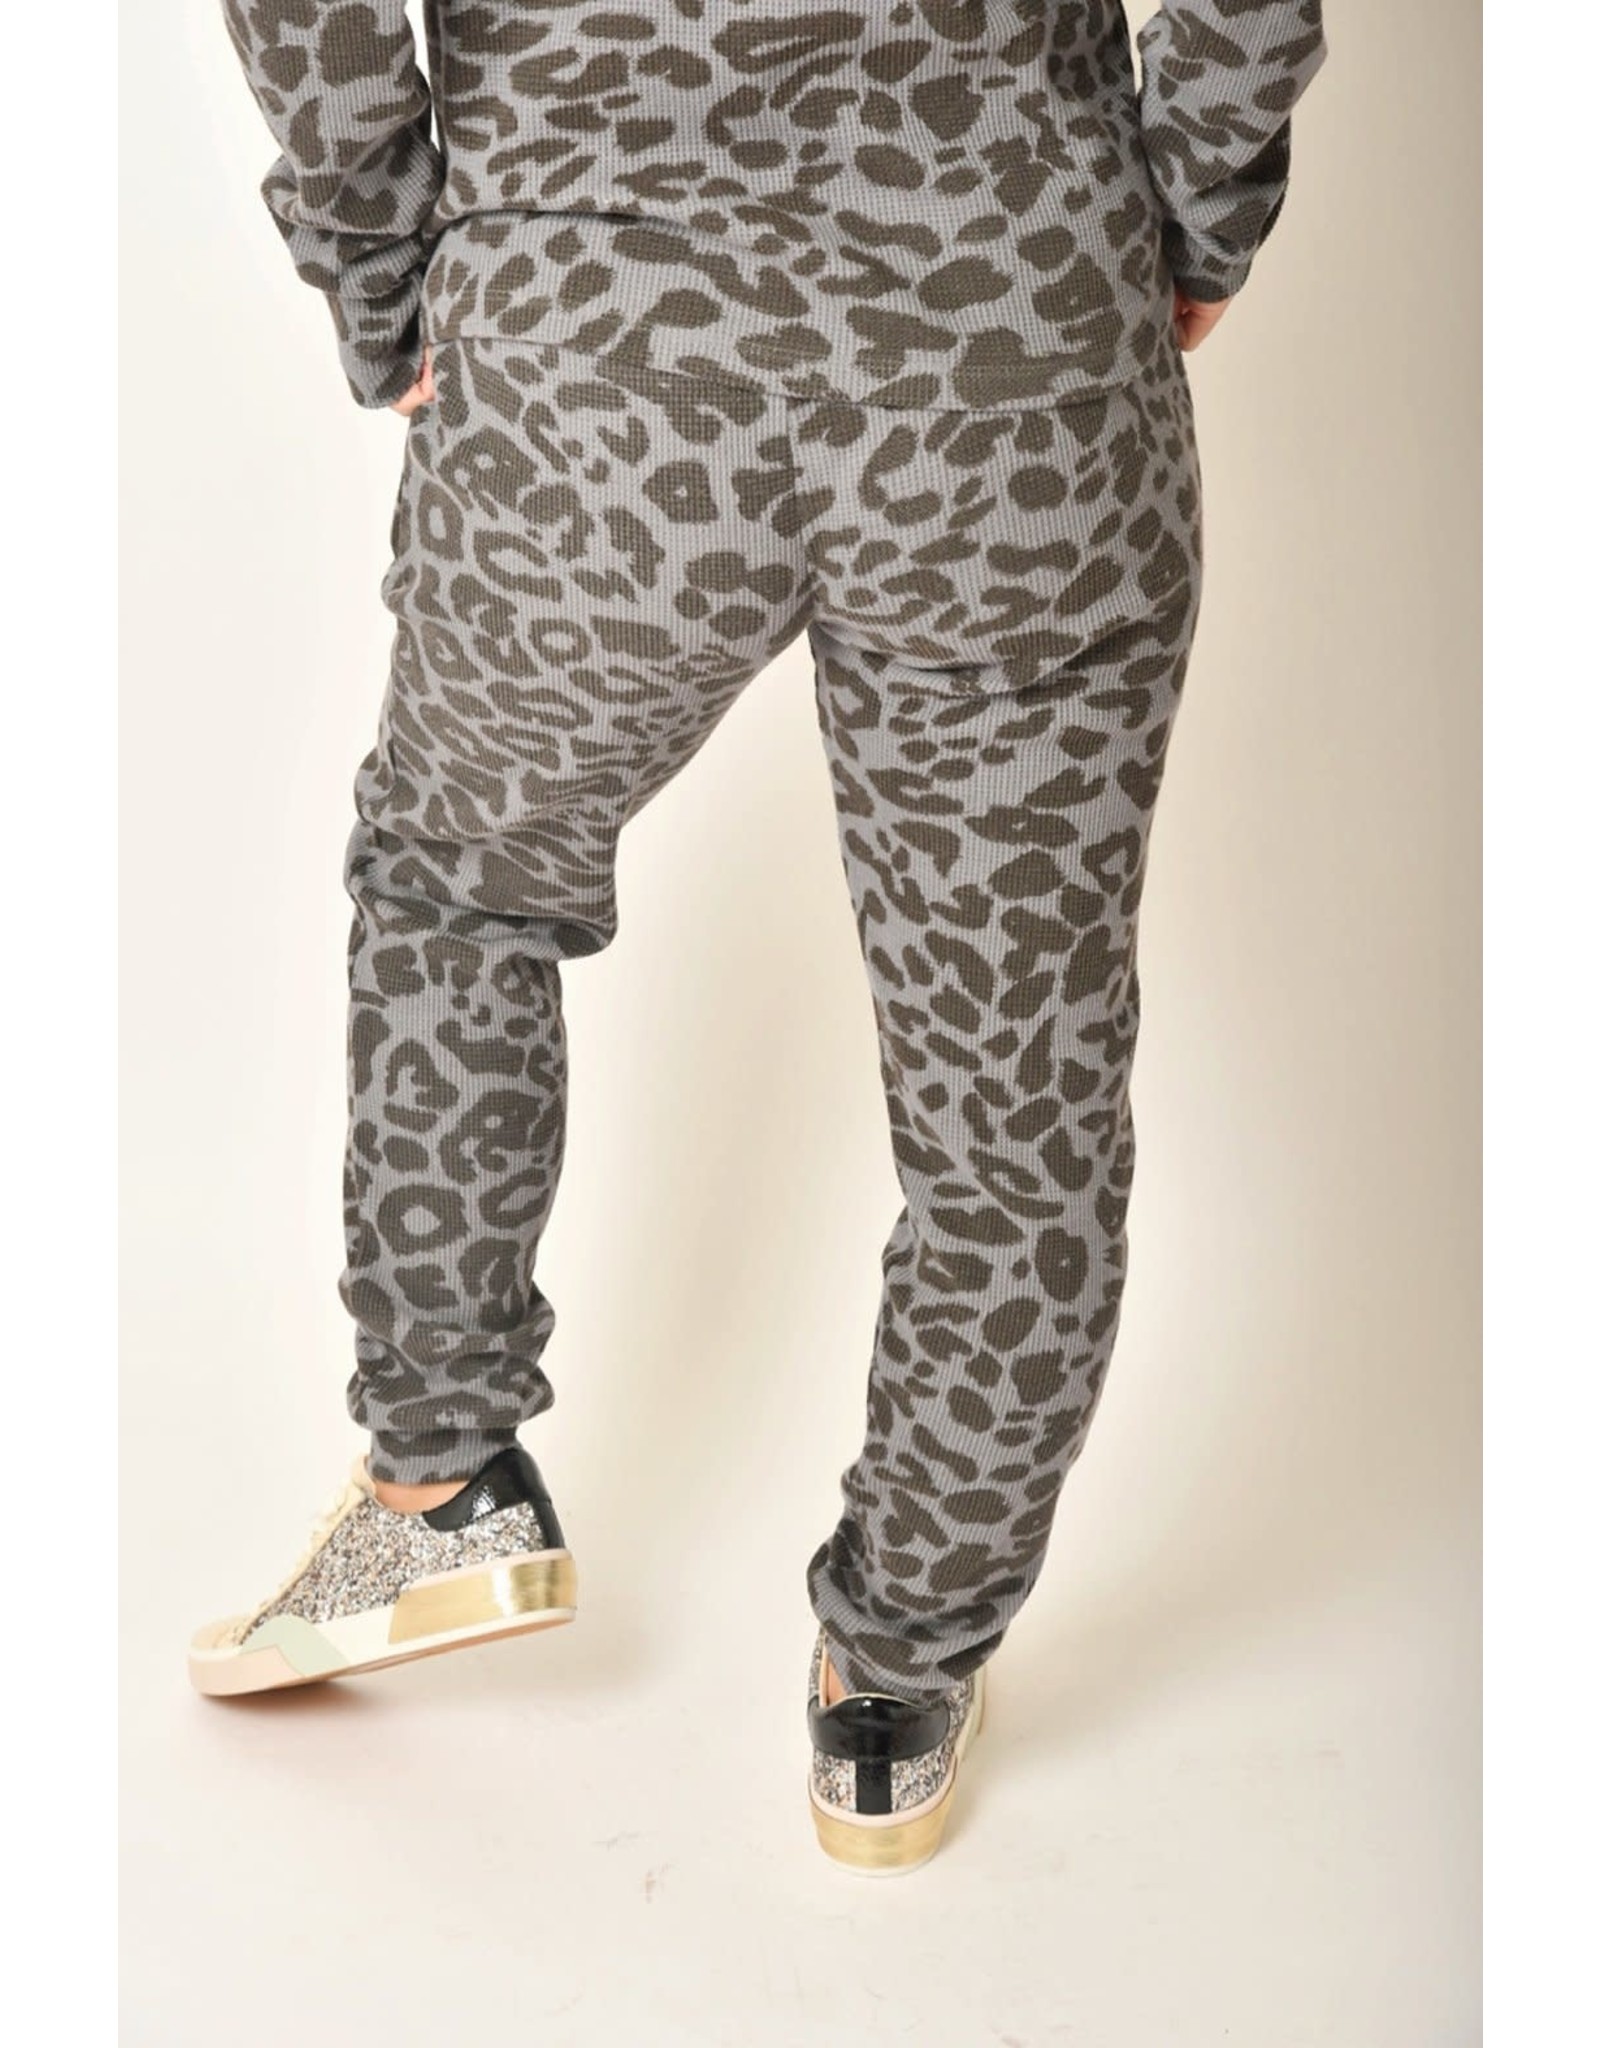 RD Style RD Style - Knit joggers (grey leopard)